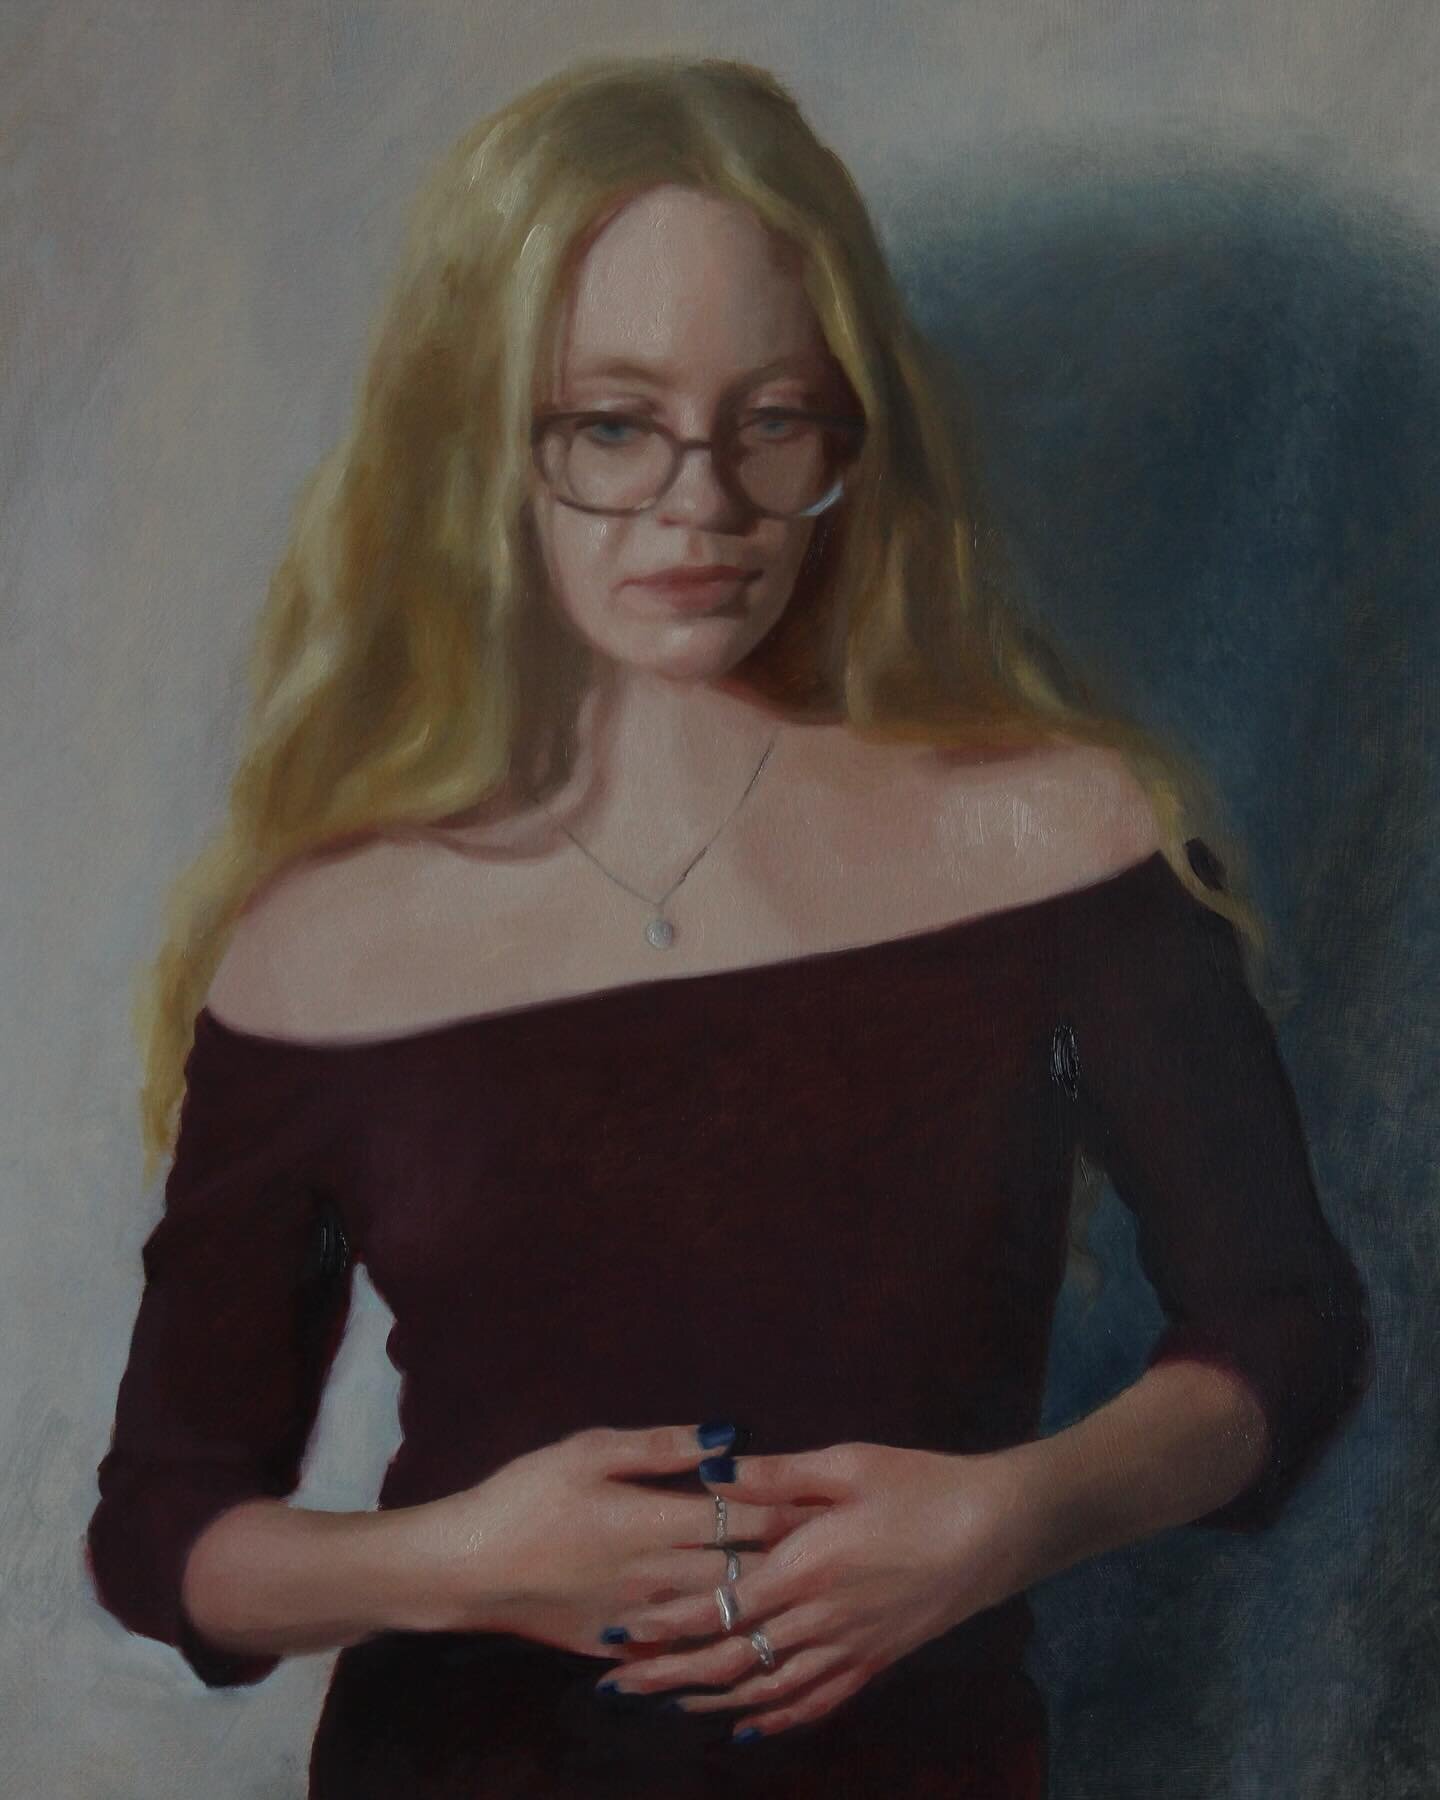 Maeve, oil on panel, 18 x 24&rdquo;

Big thank you to @maevedwilson for modeling for me!